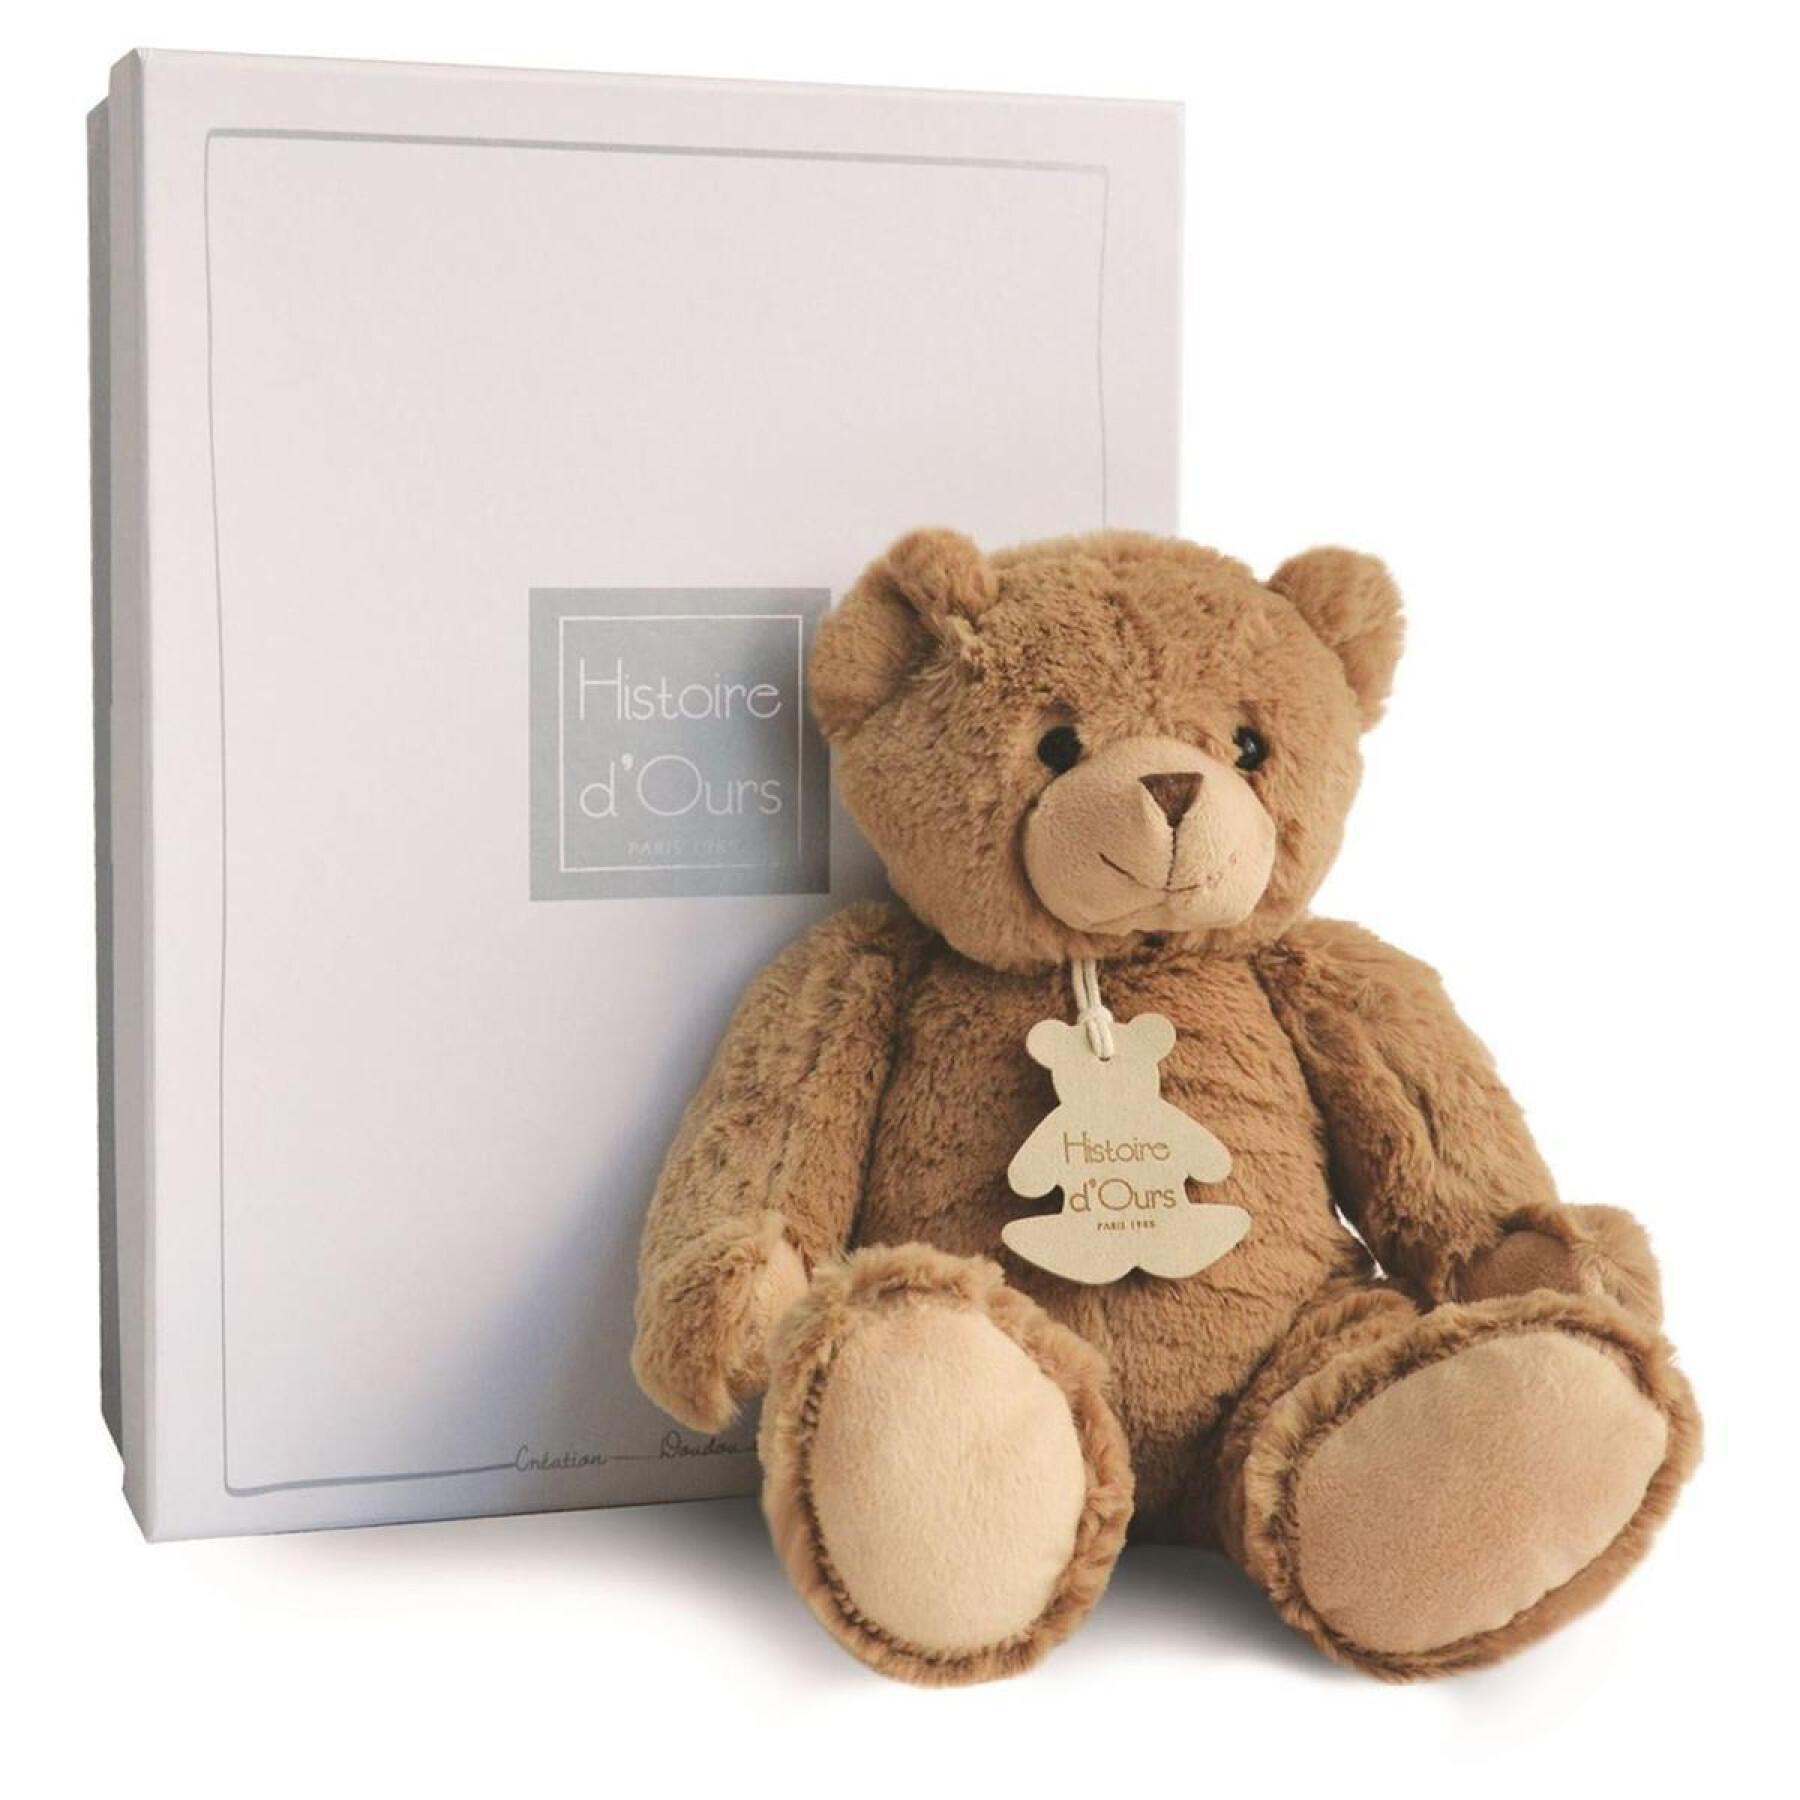 Plysch Histoire d'Ours Calin'Ours